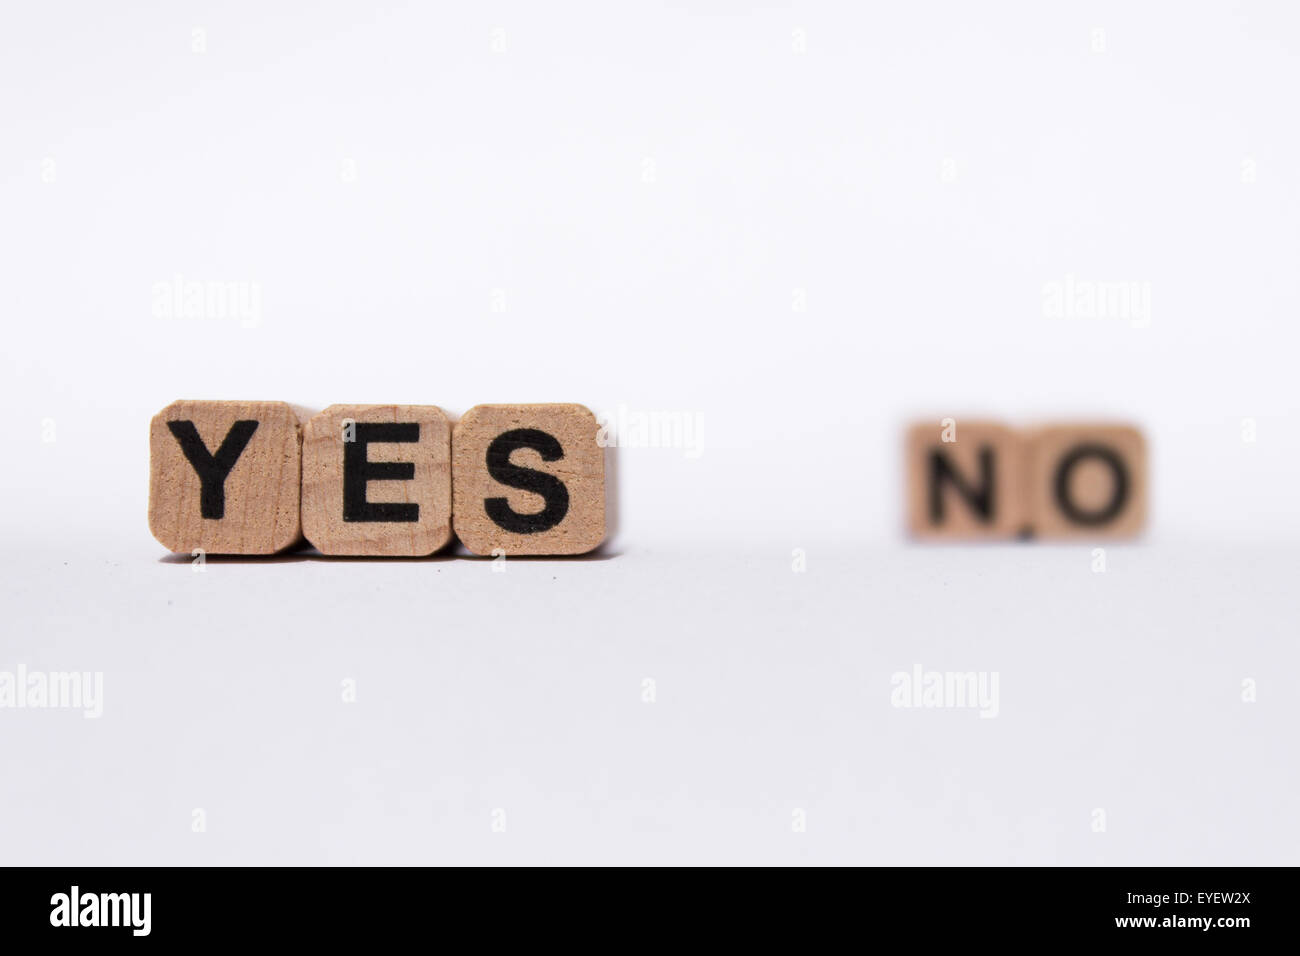 yes no - question answer concept - text on white background Stock Photo